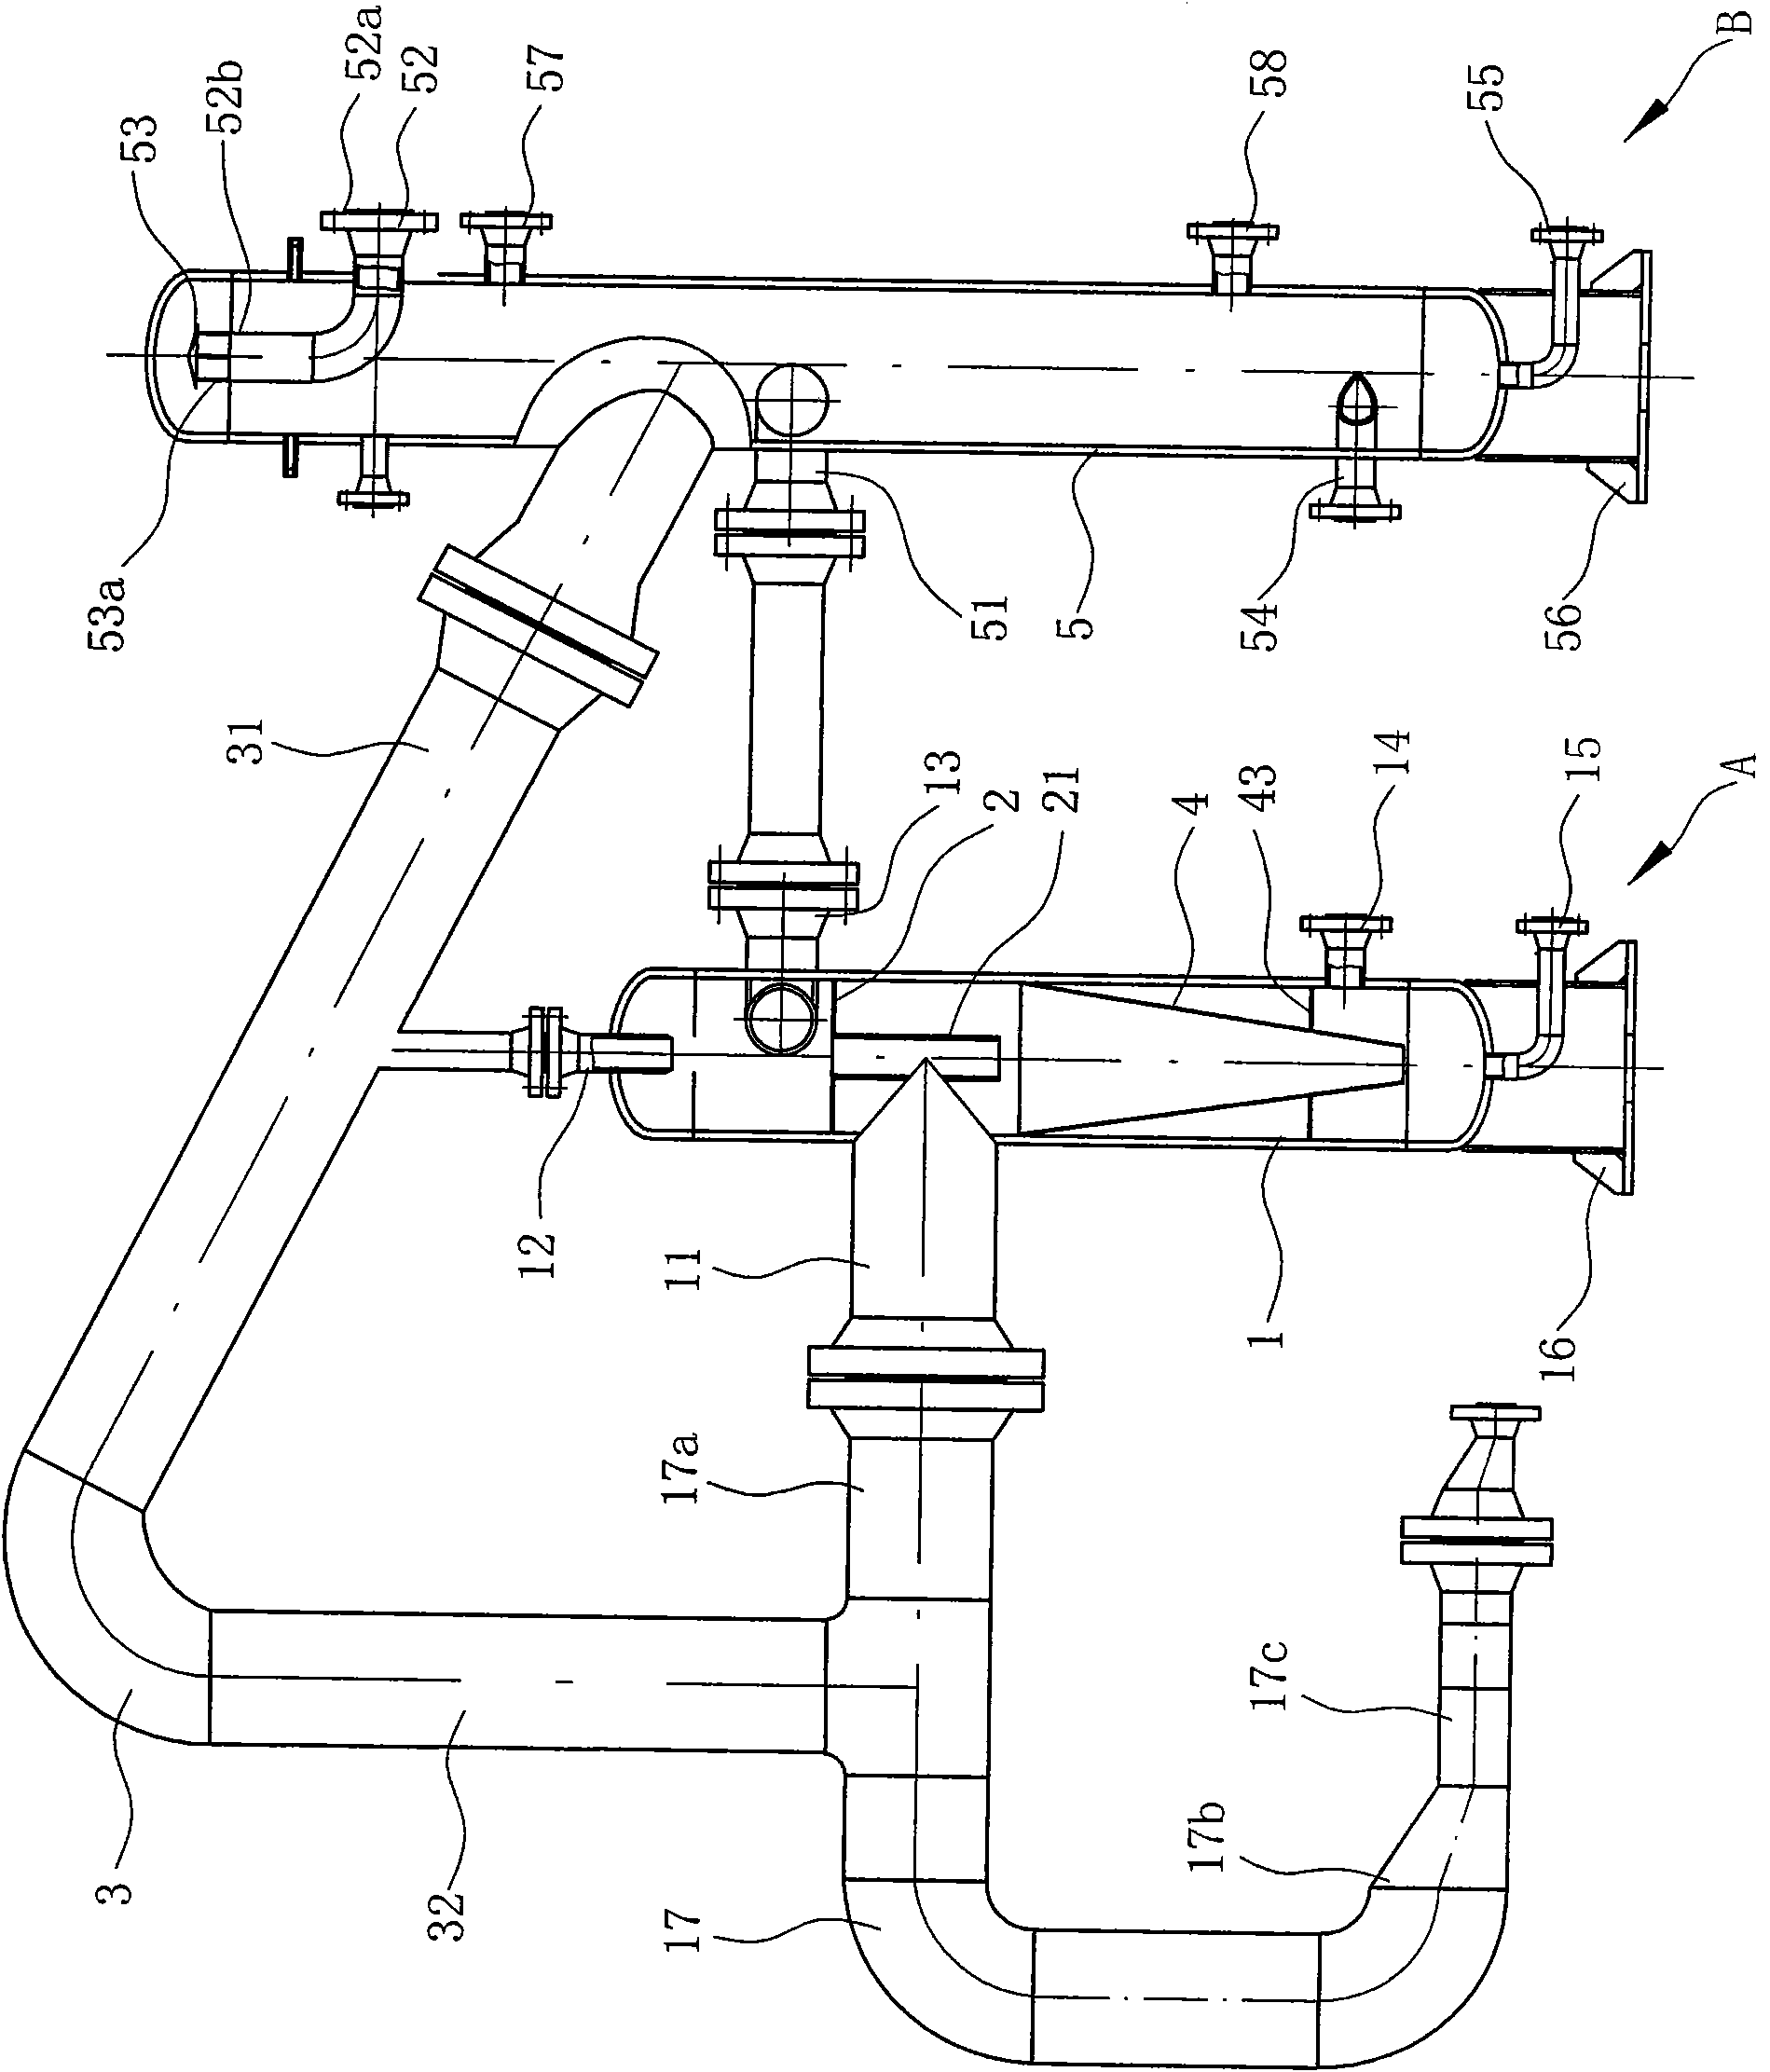 Gas-oil-water separation system